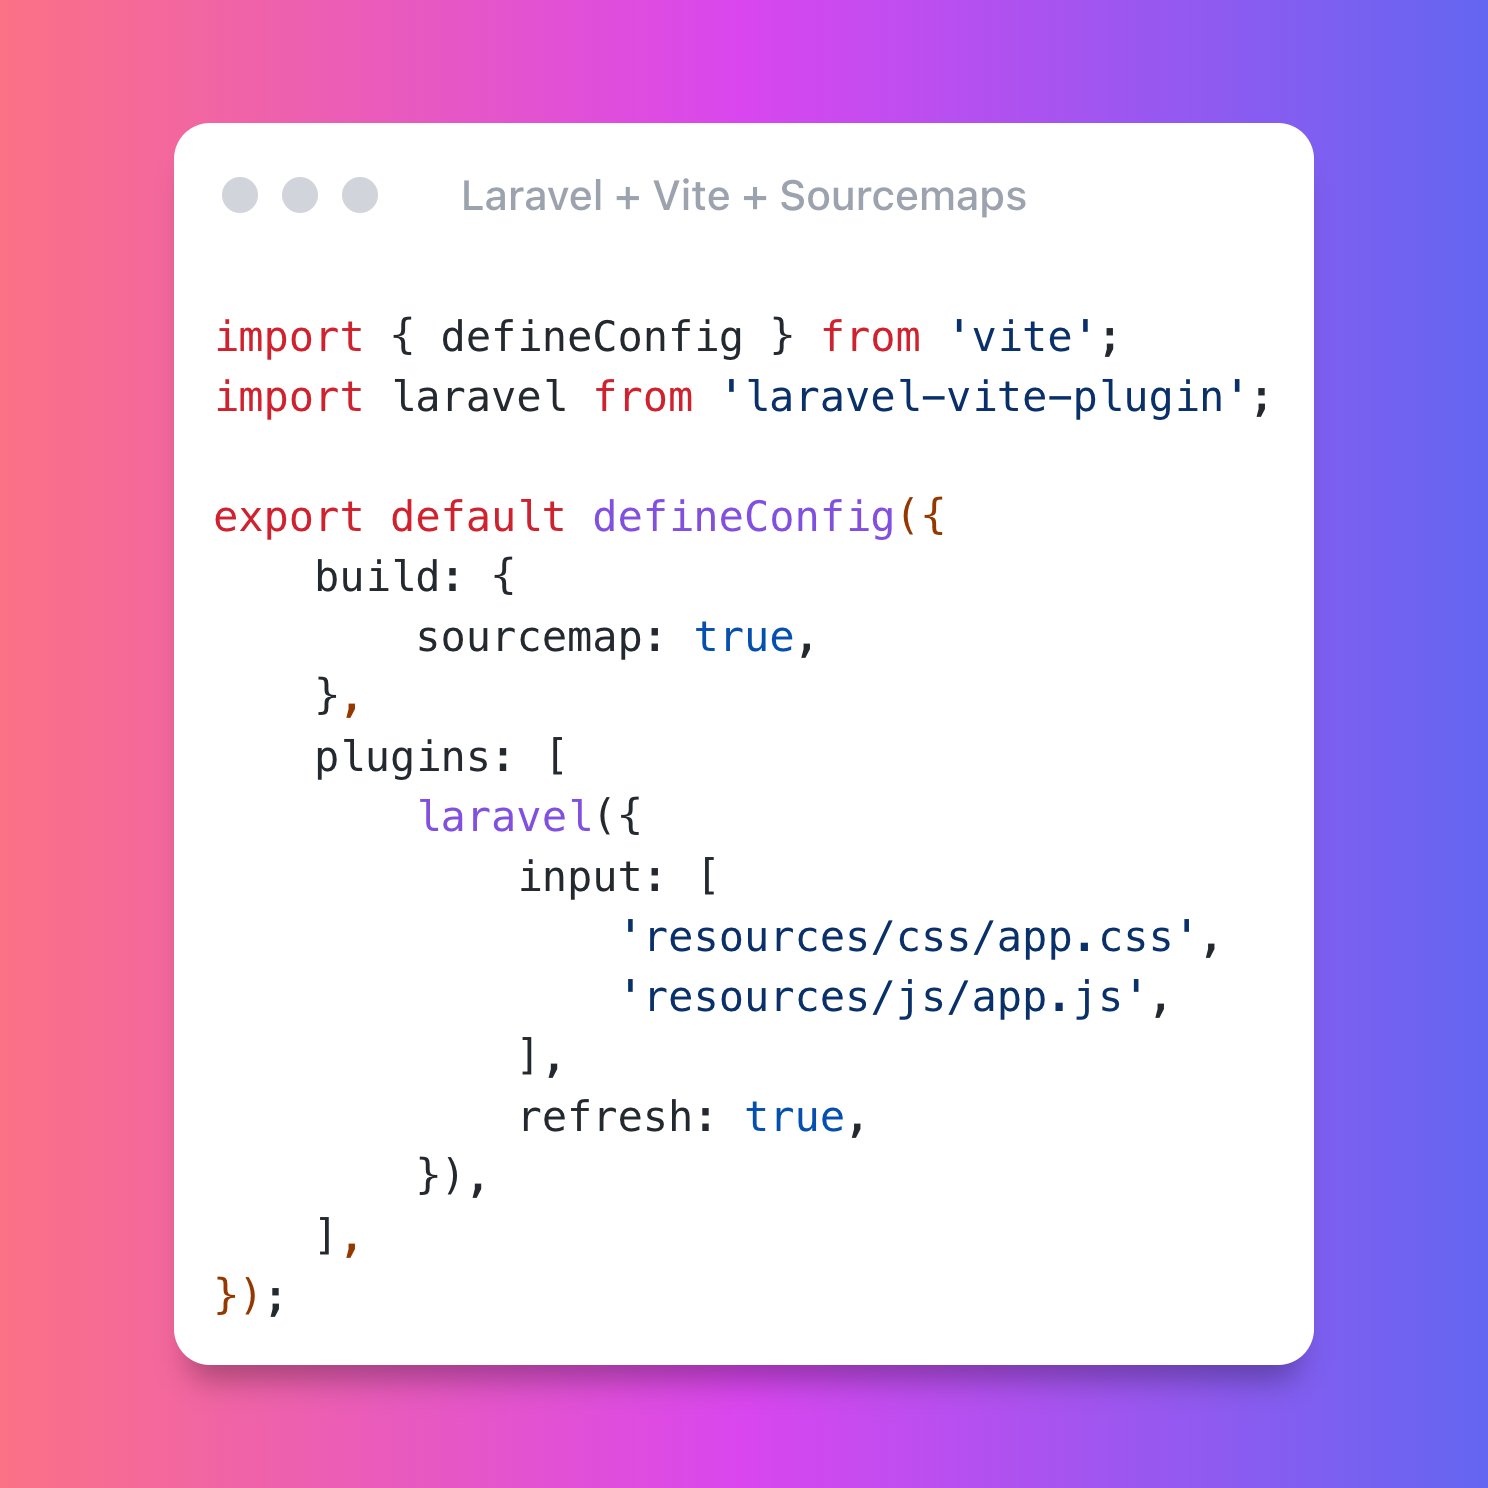 You can enable JS sourcemaps using @vite_js in Laravel 